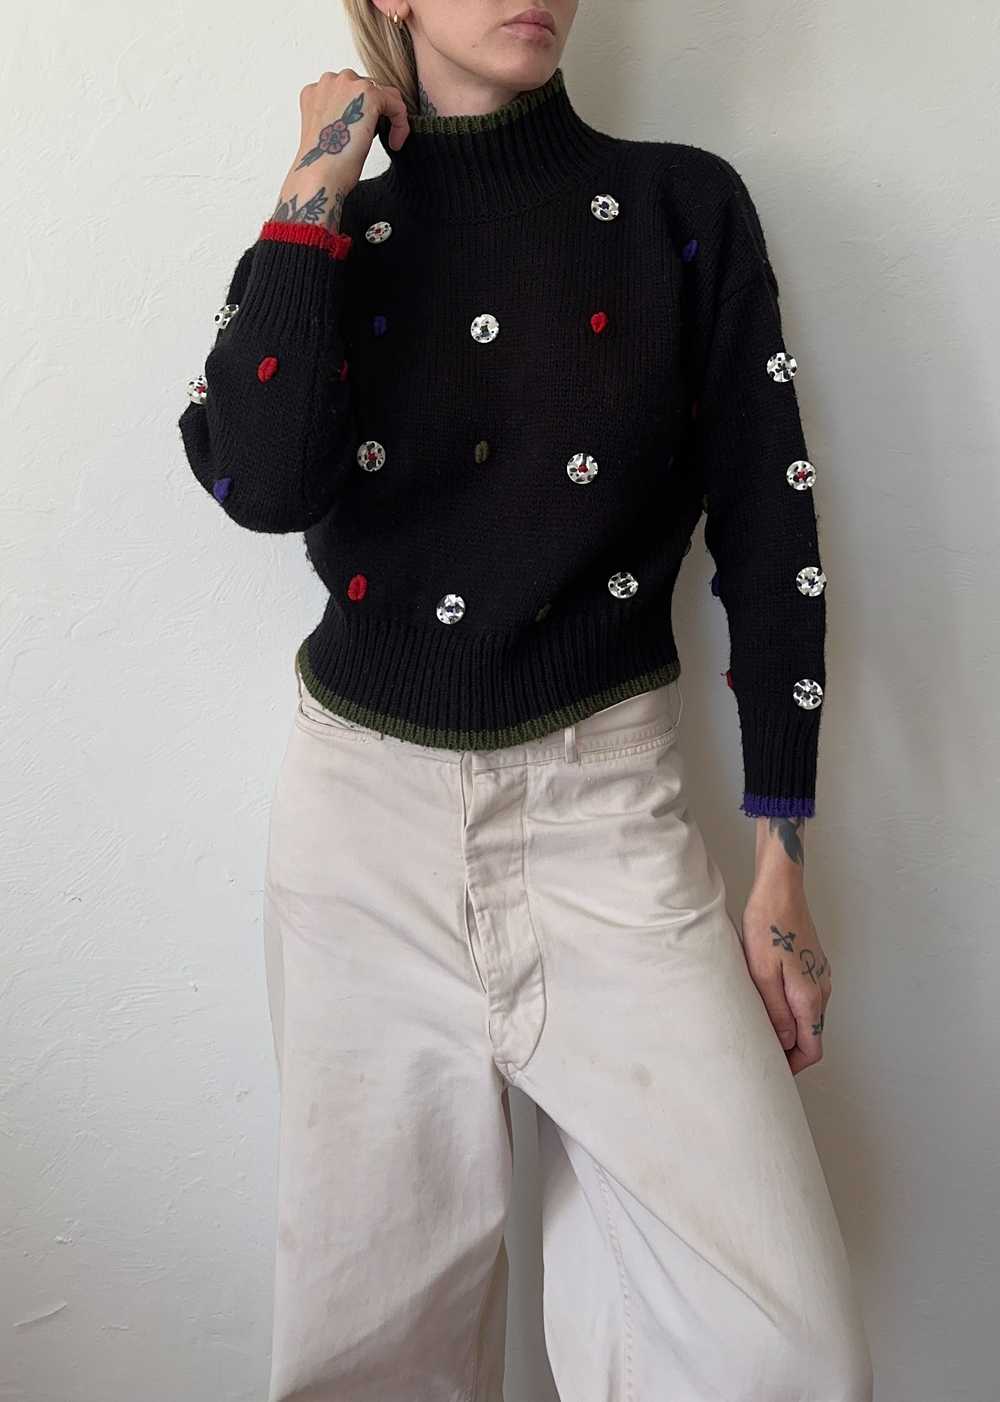 1980s Button Sweater - image 2